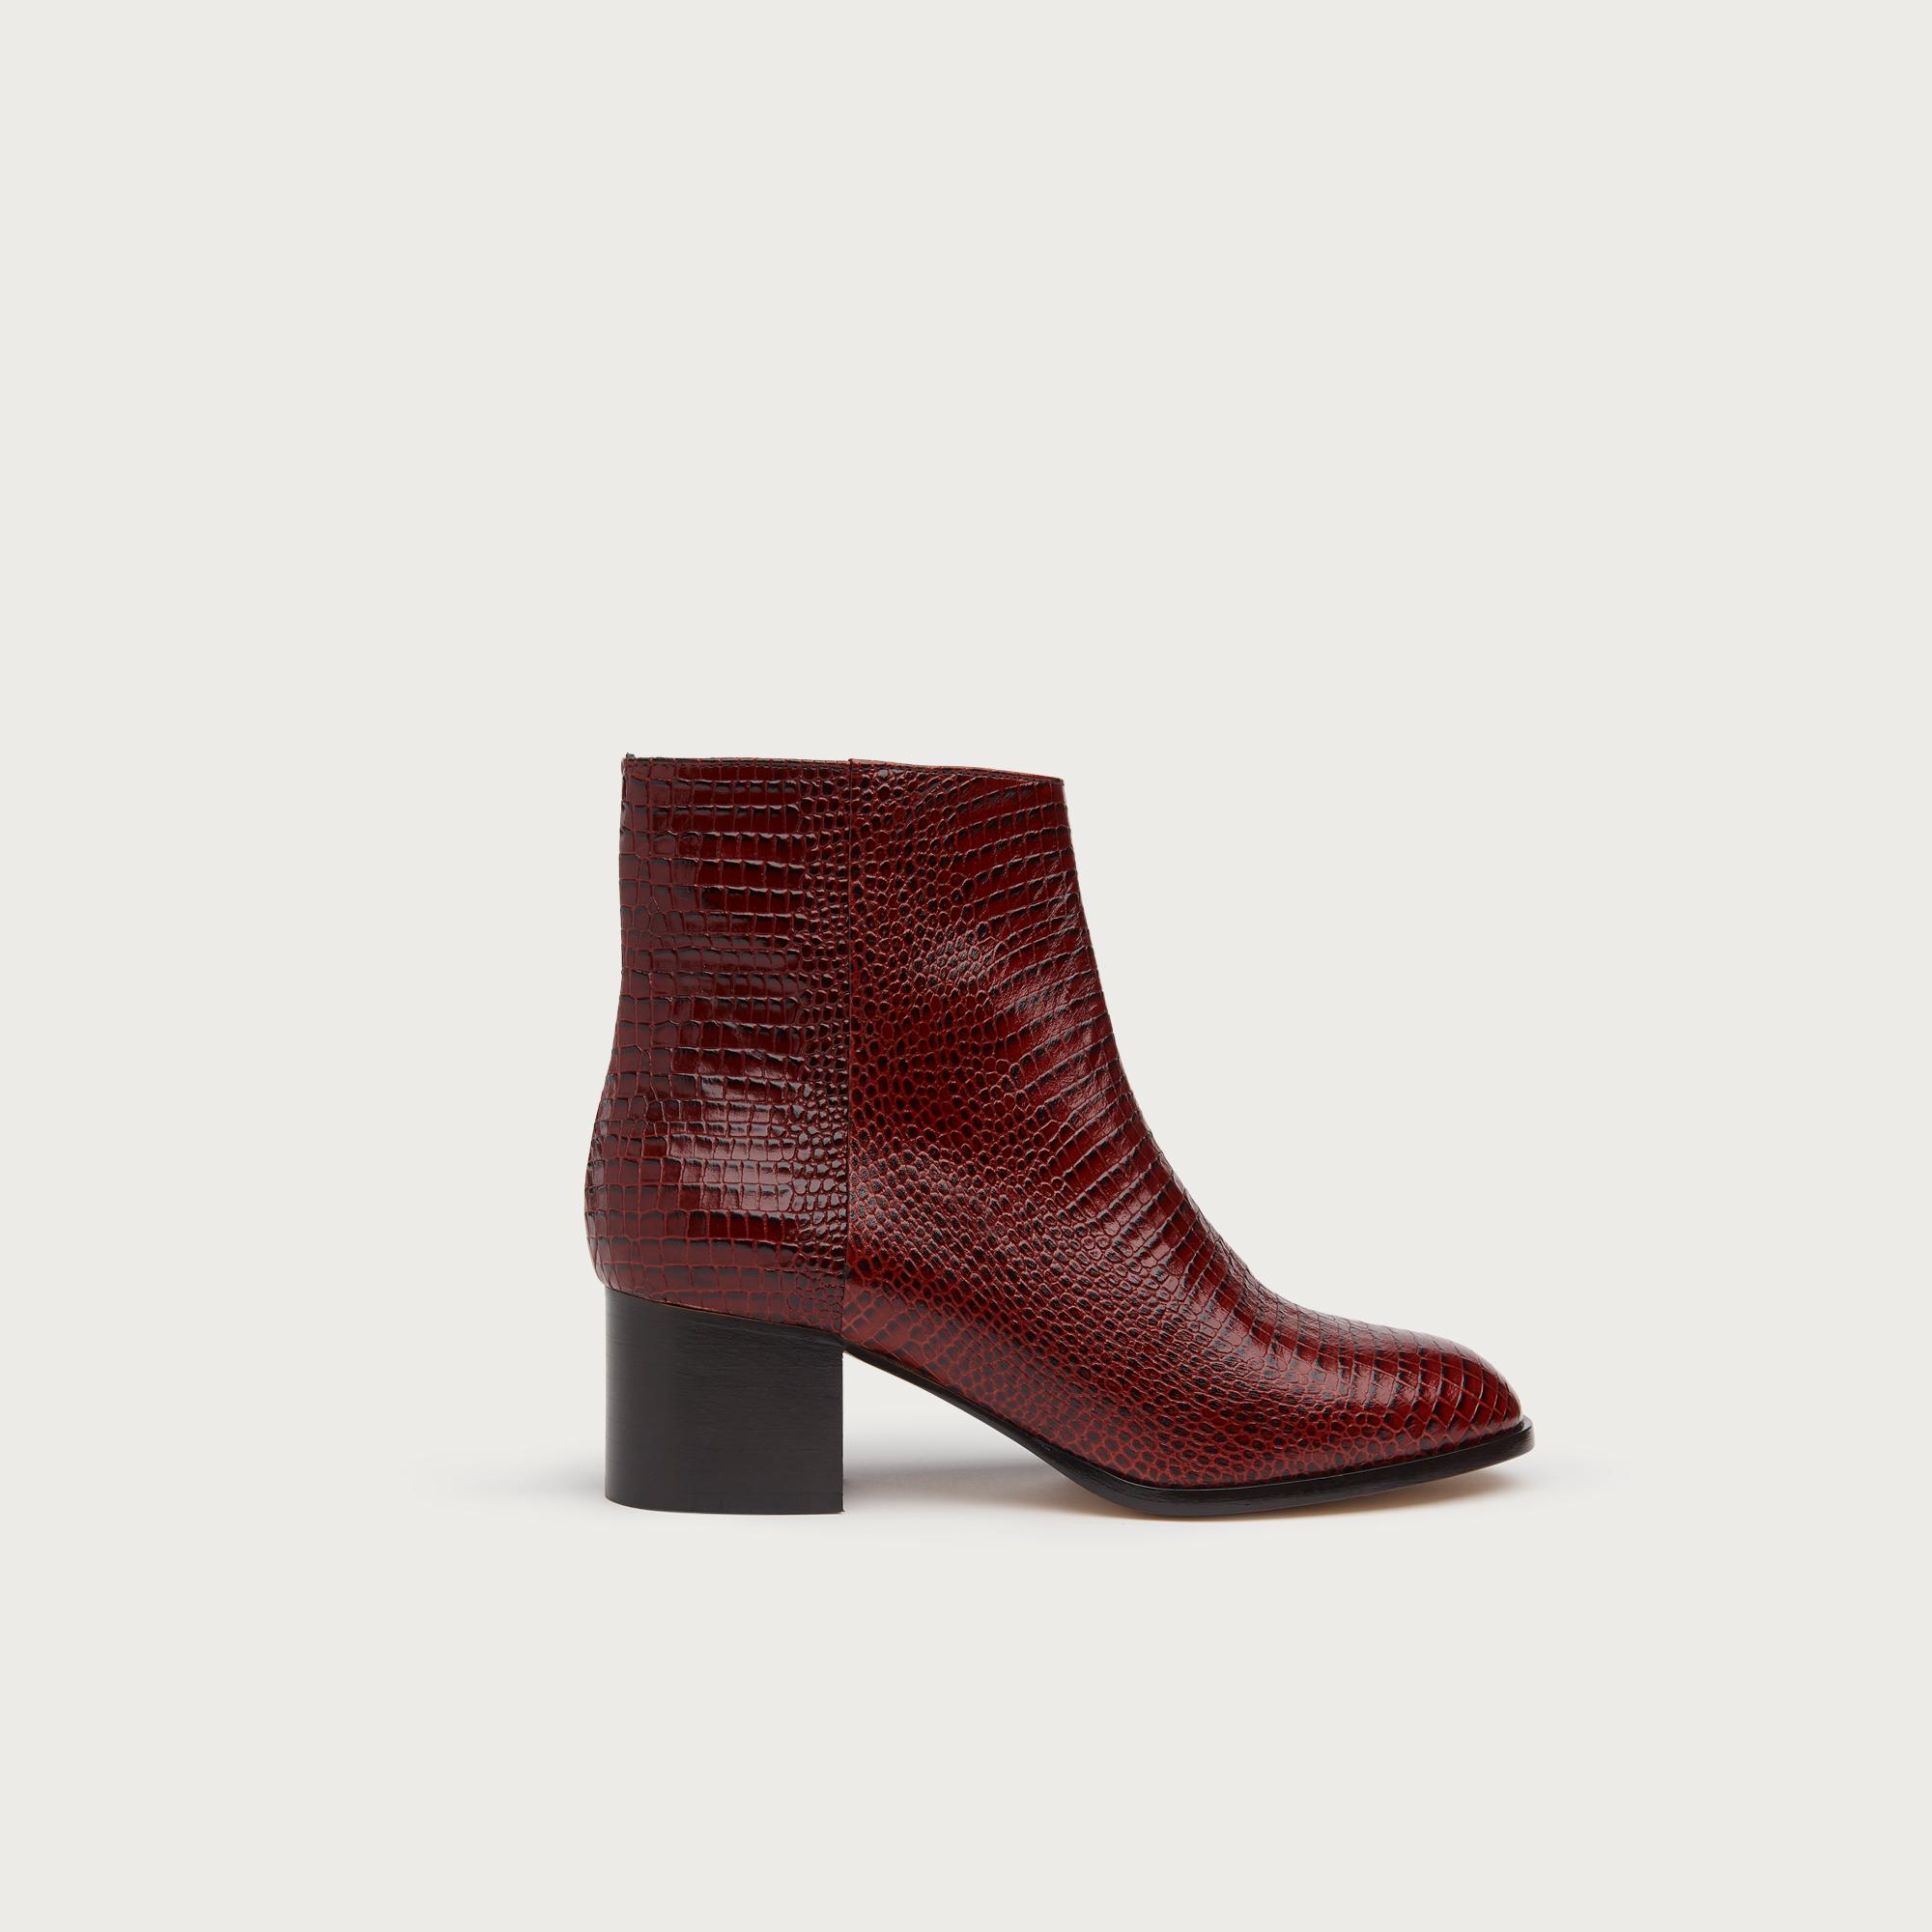 burgundy ankle boots uk